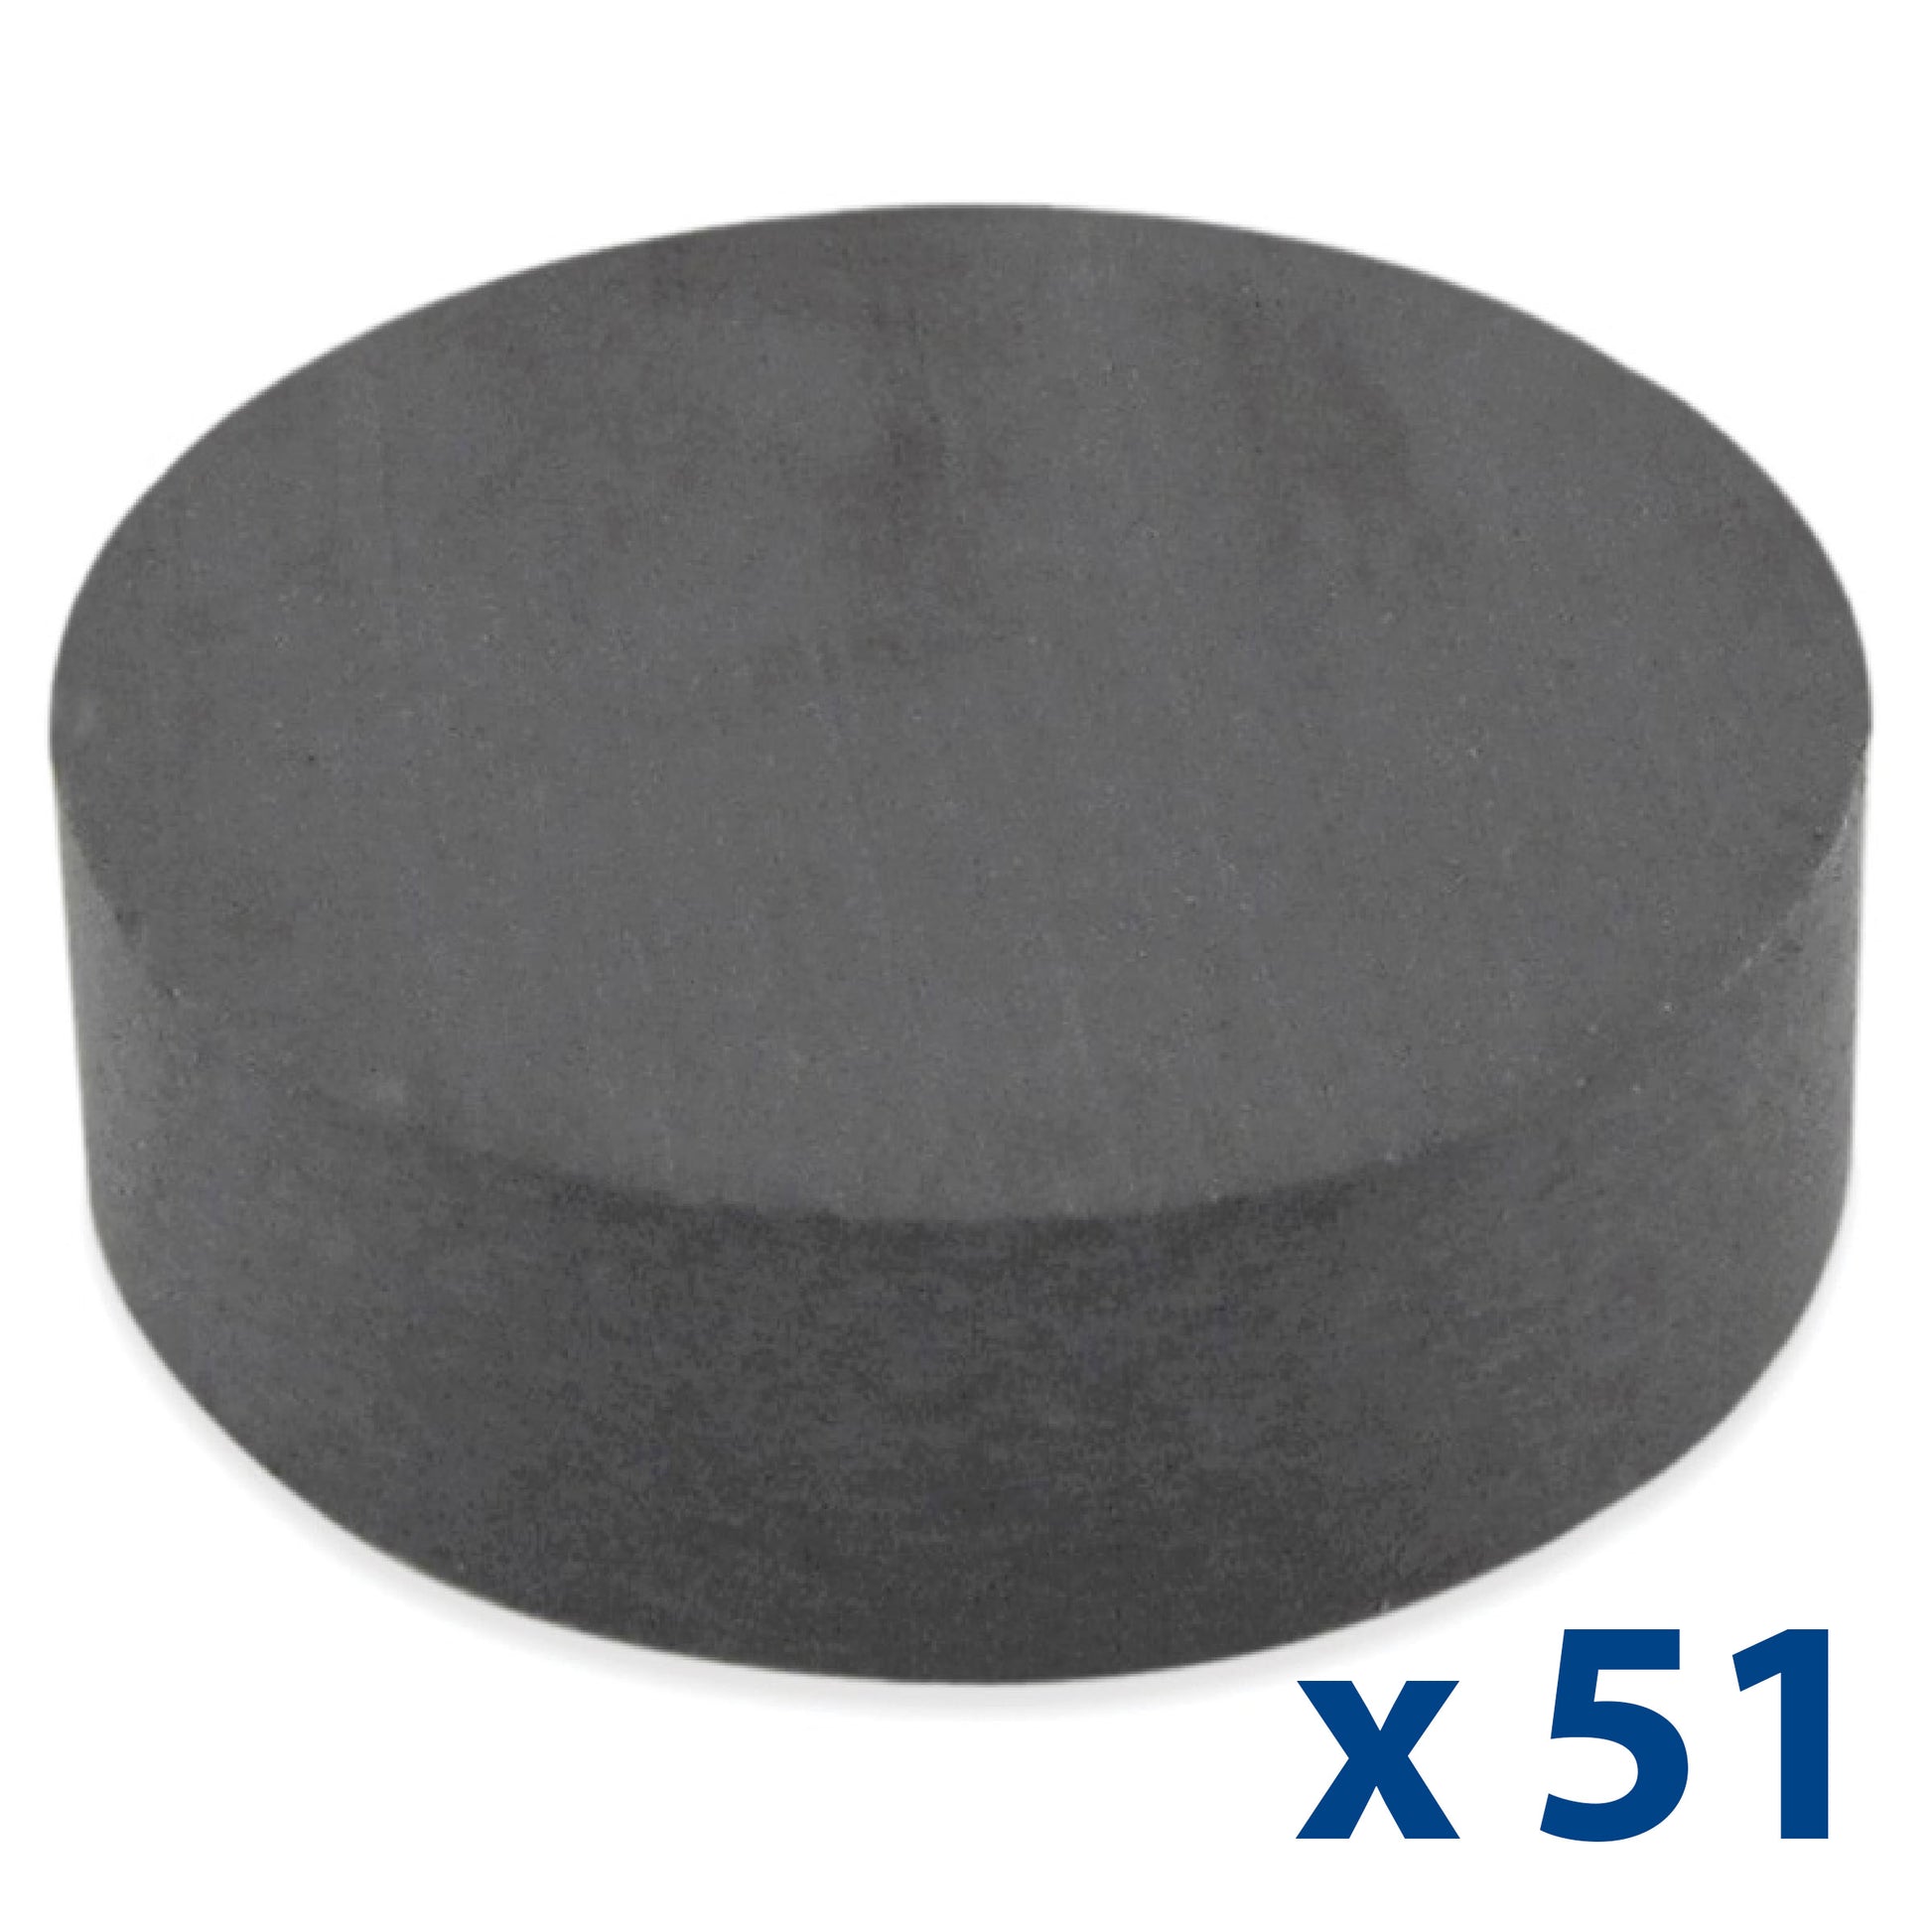 Load image into Gallery viewer, 07049 Ceramic Disc Magnets (51pk) - 45 Degree Angle View